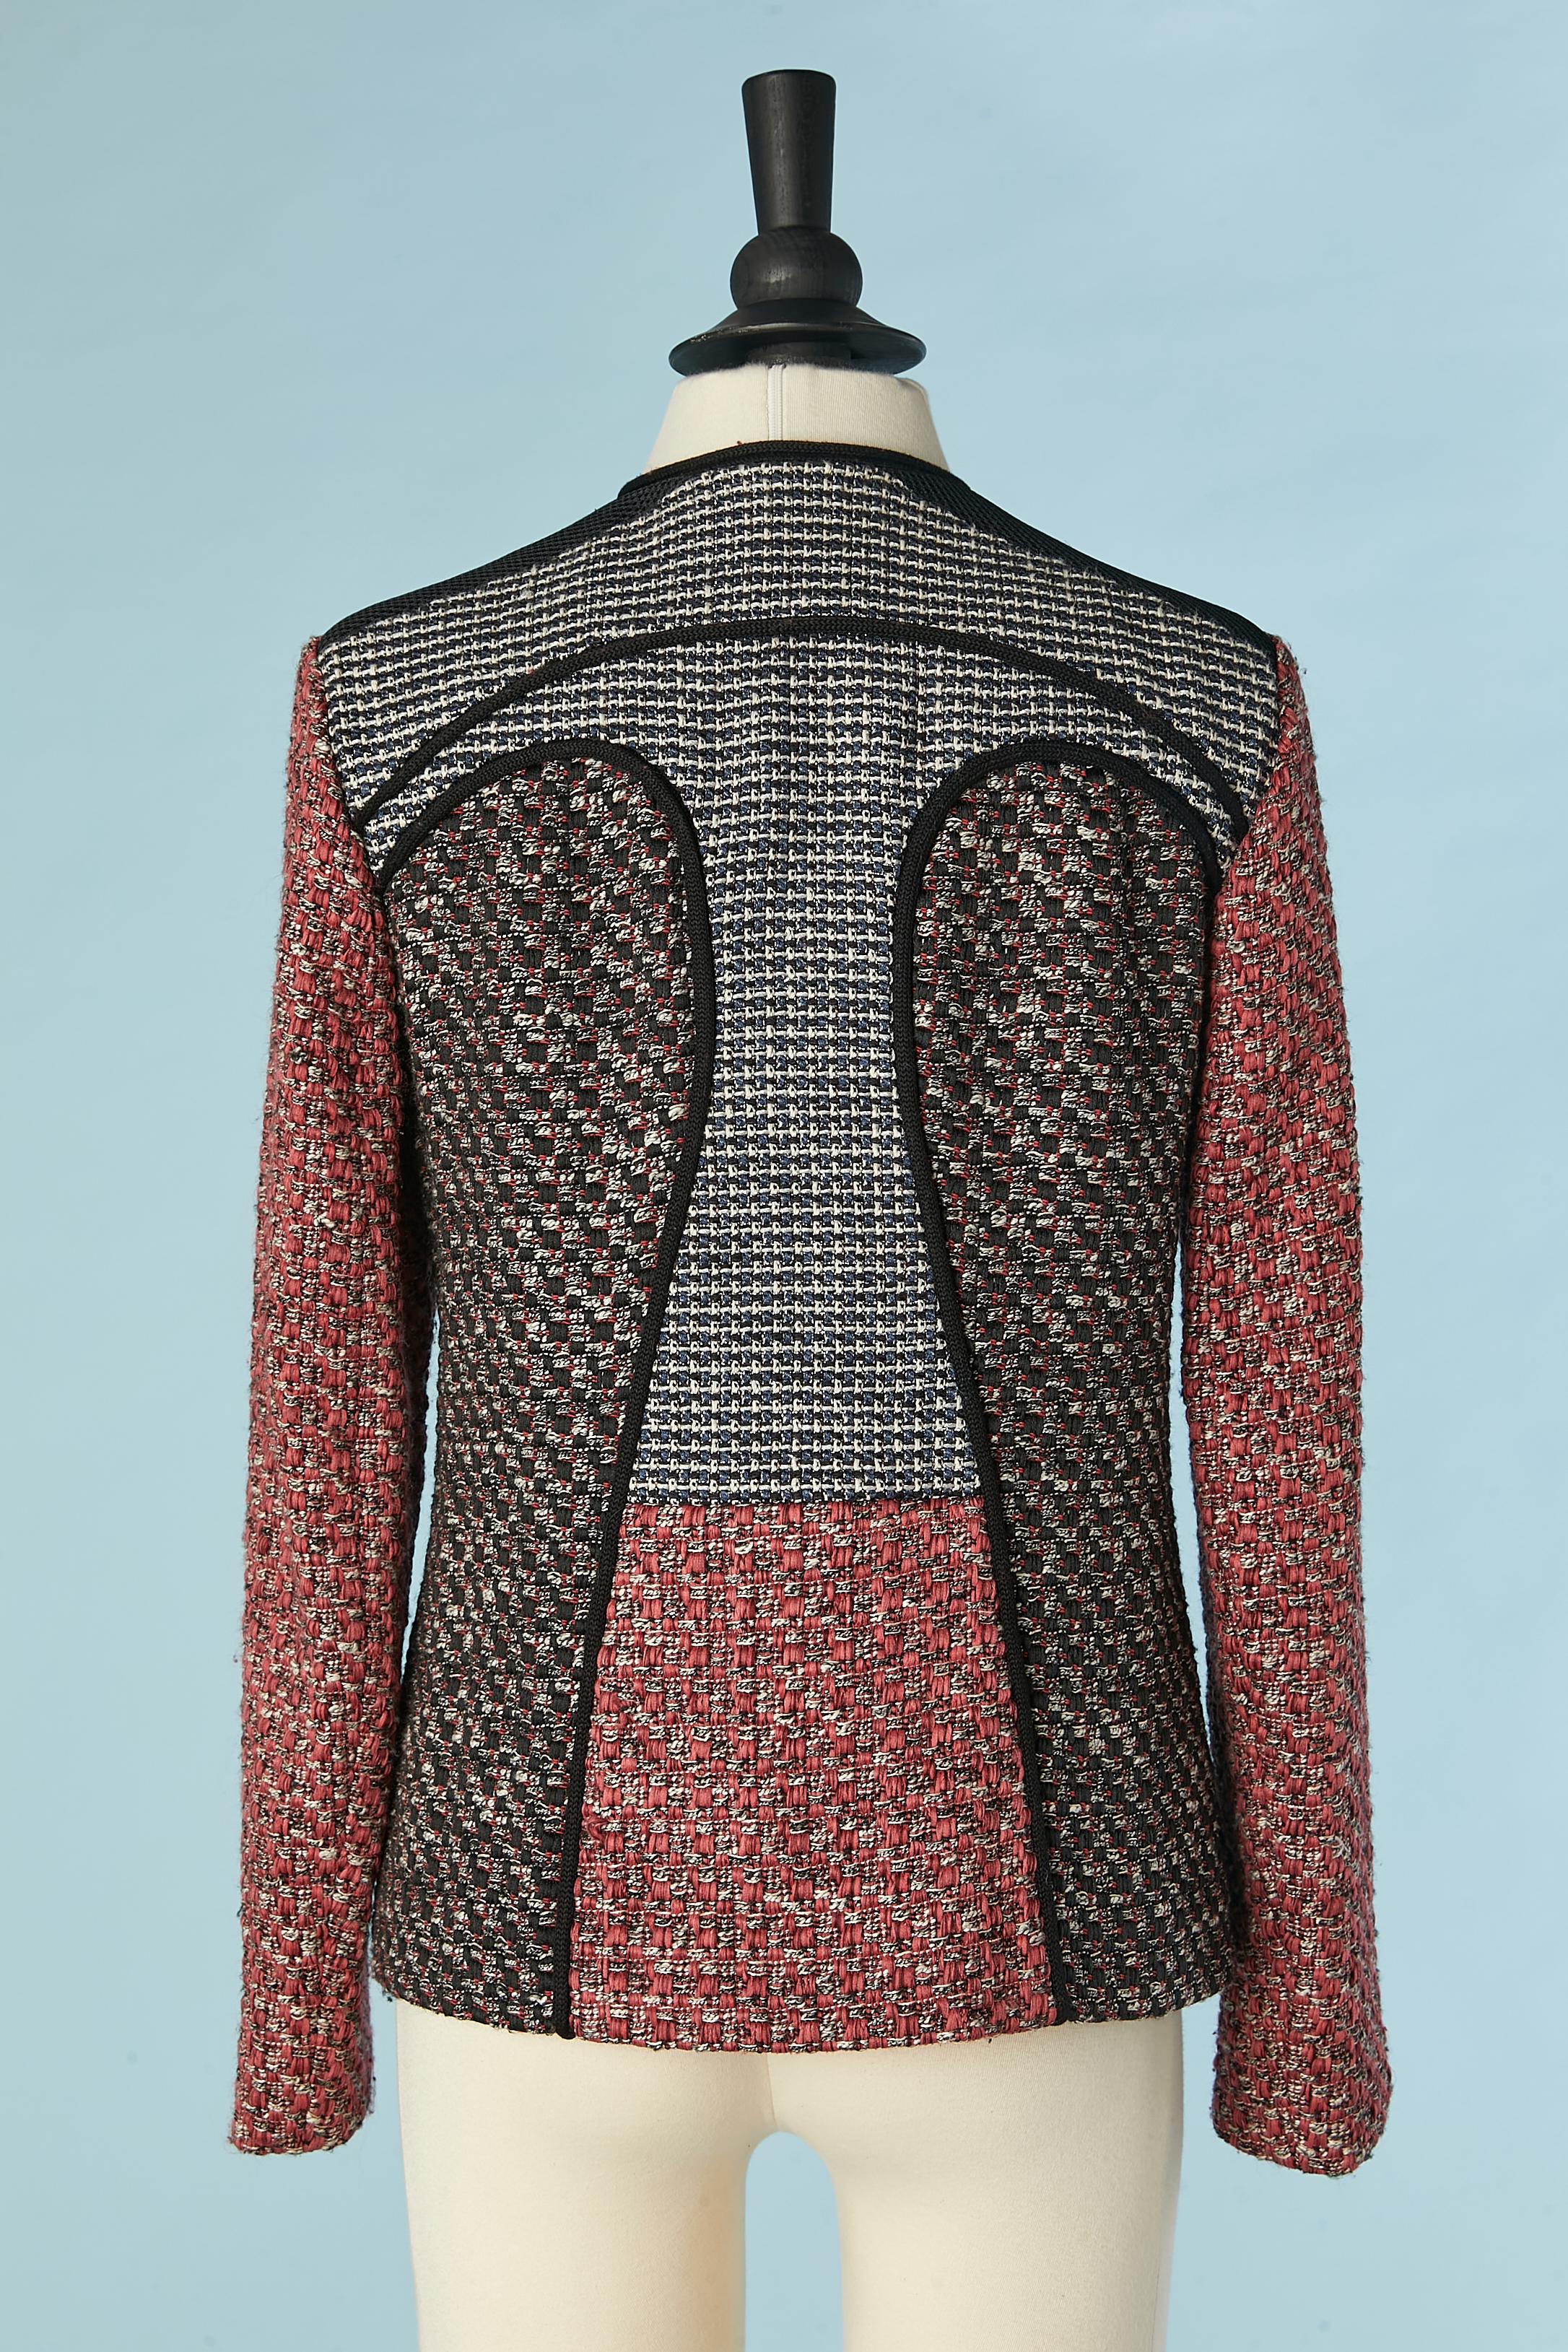 Edge to edge jacket made with 3 type of tweed and technical fabric M Missoni  For Sale 2